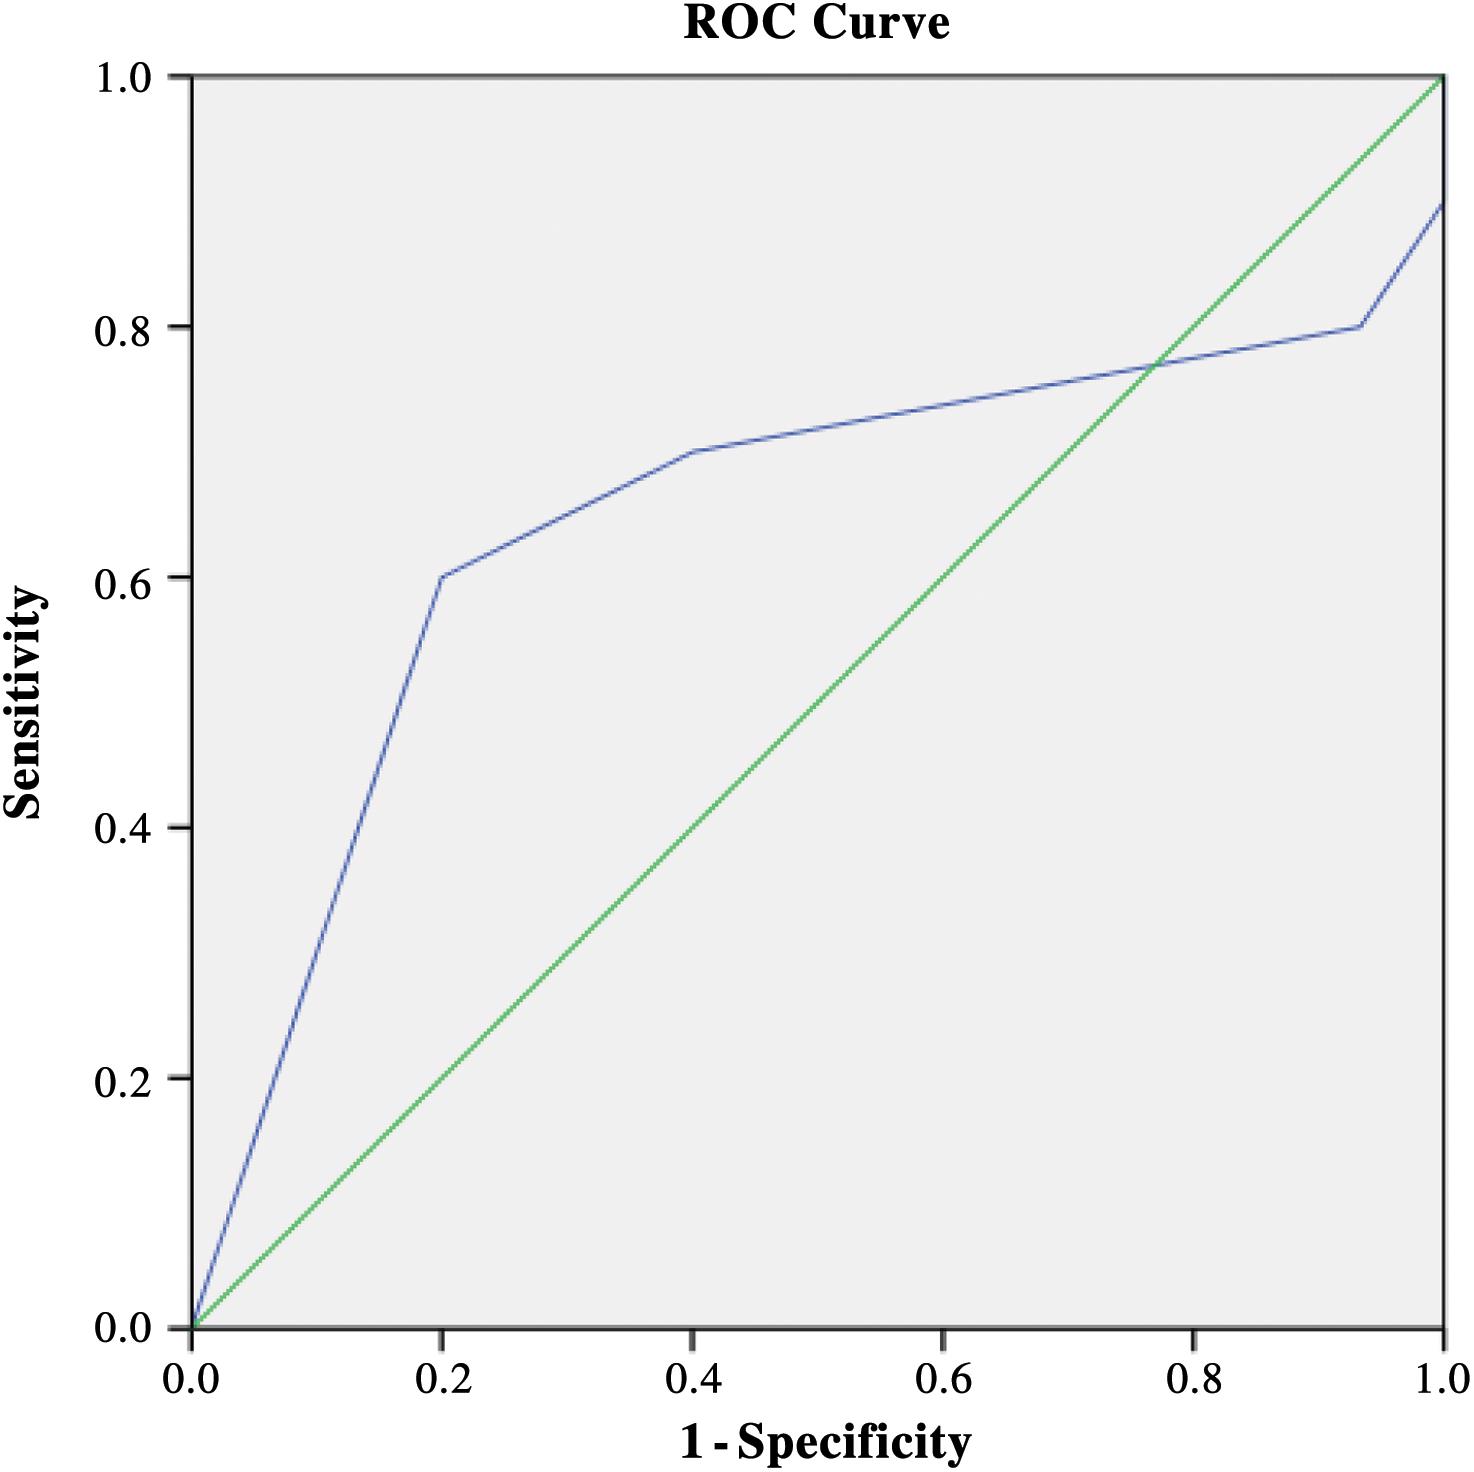 Diagnostic accuracy of FT as determined by area under the curve (AUROC = 0.647).